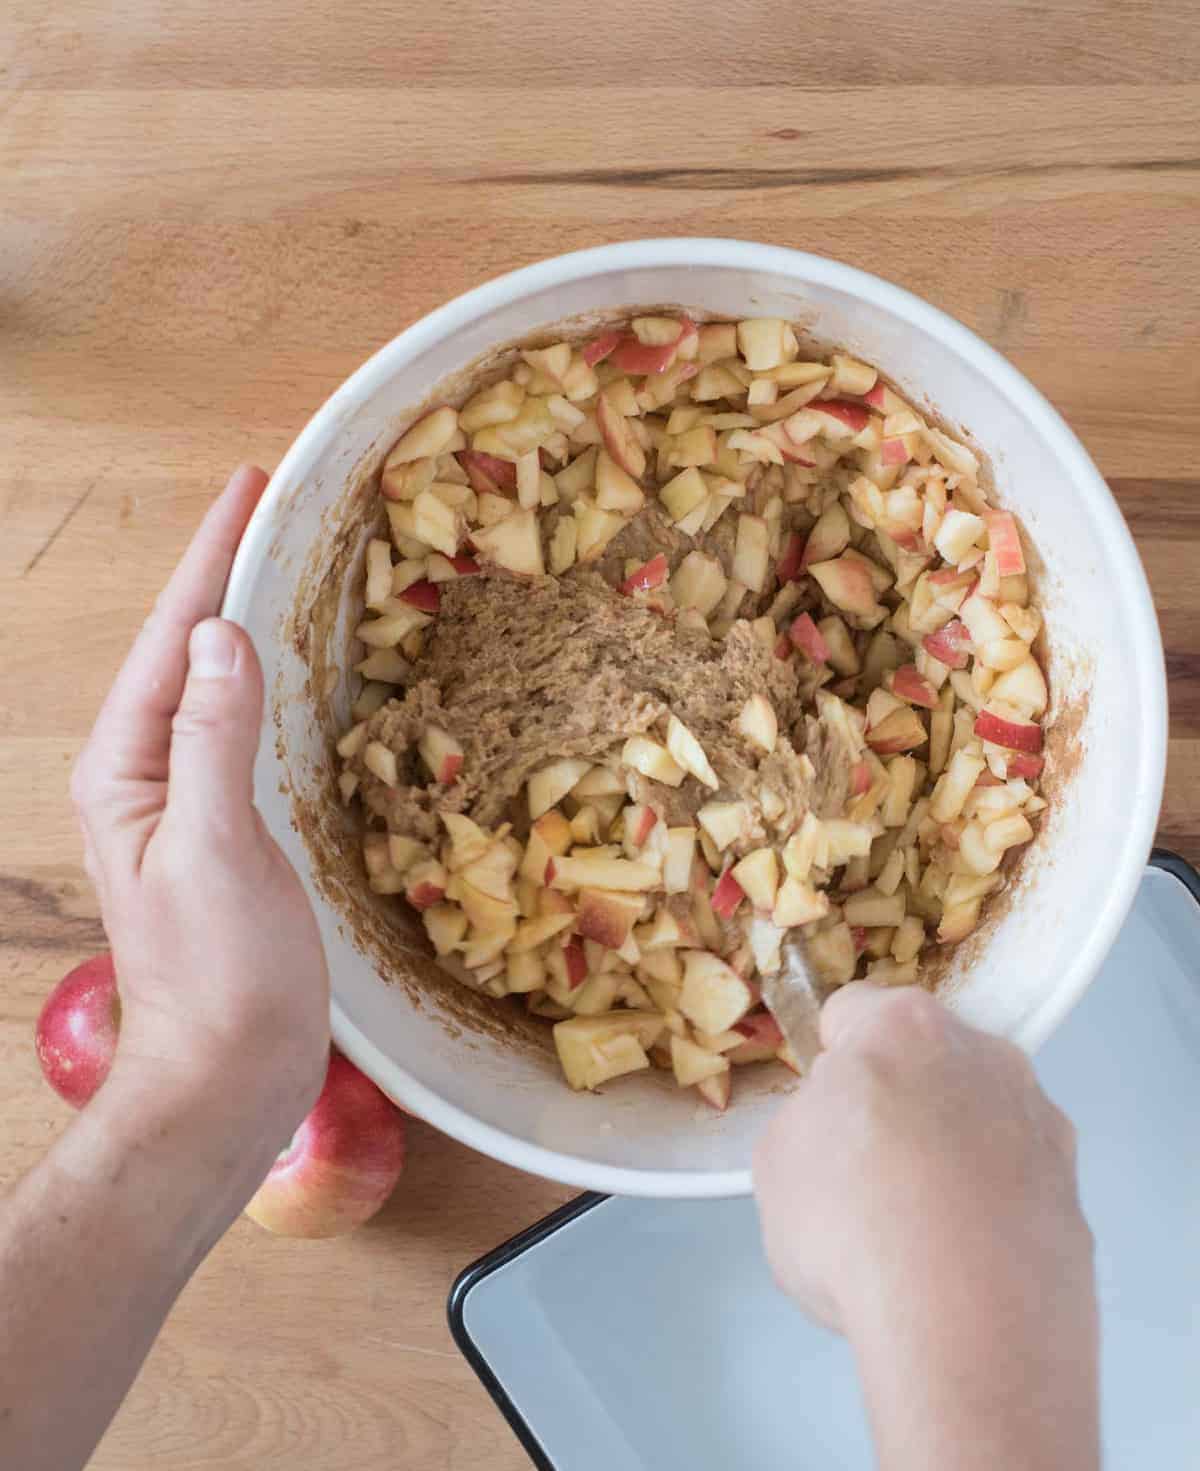 A mixing bowl with cake batter and chopped apples